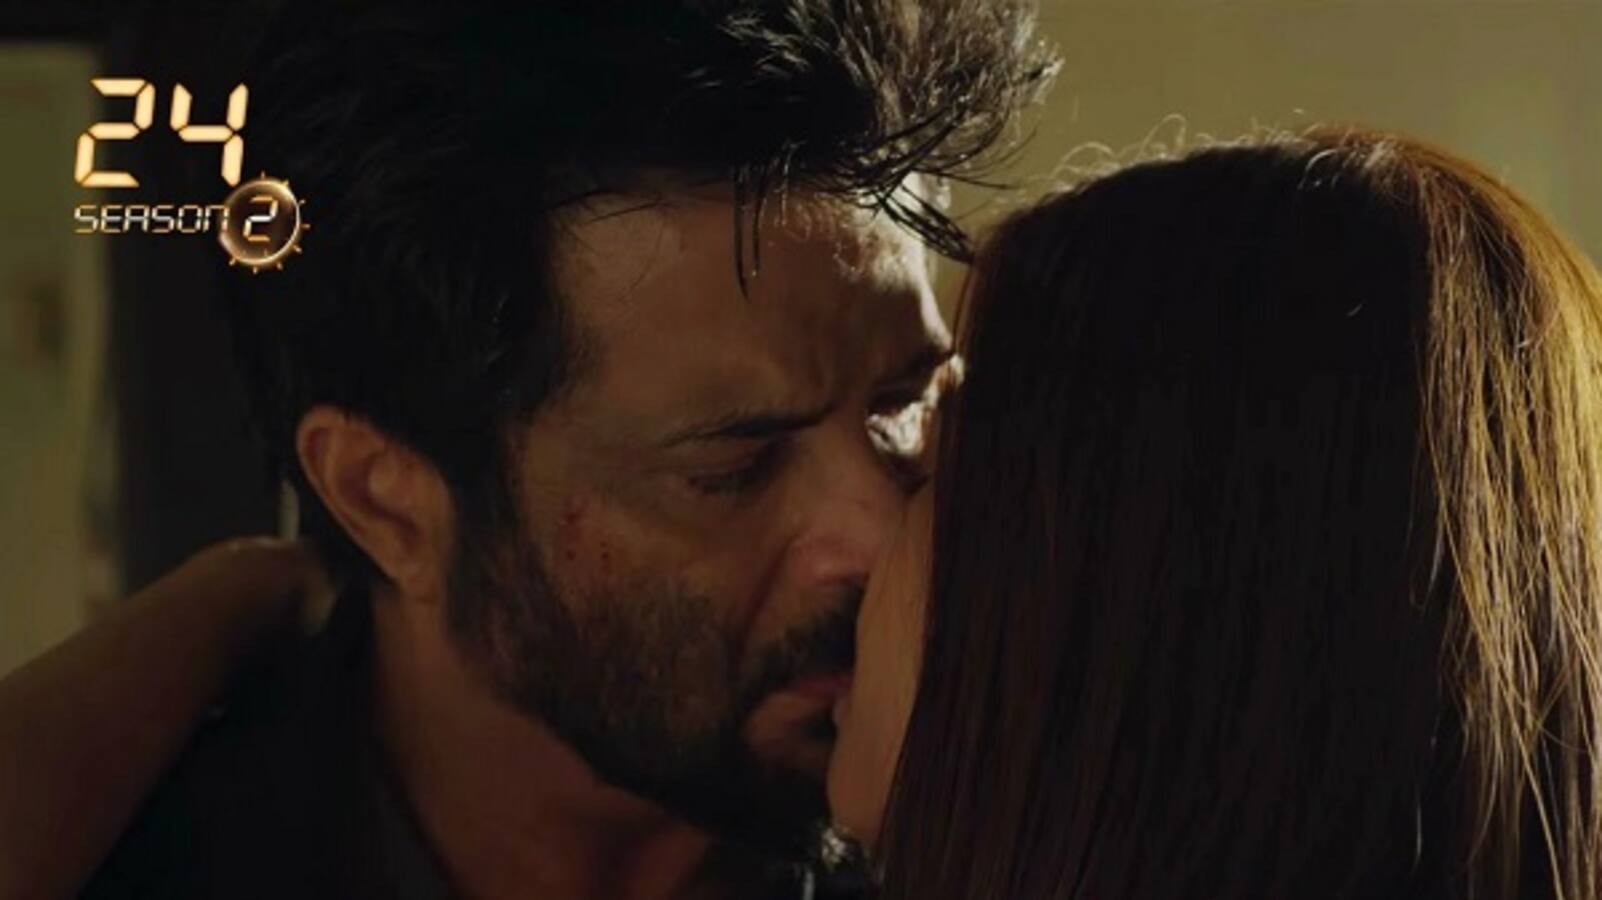 Anil Kapoor talks about his kissing scene with Surveen Chawla in 24 season 2!